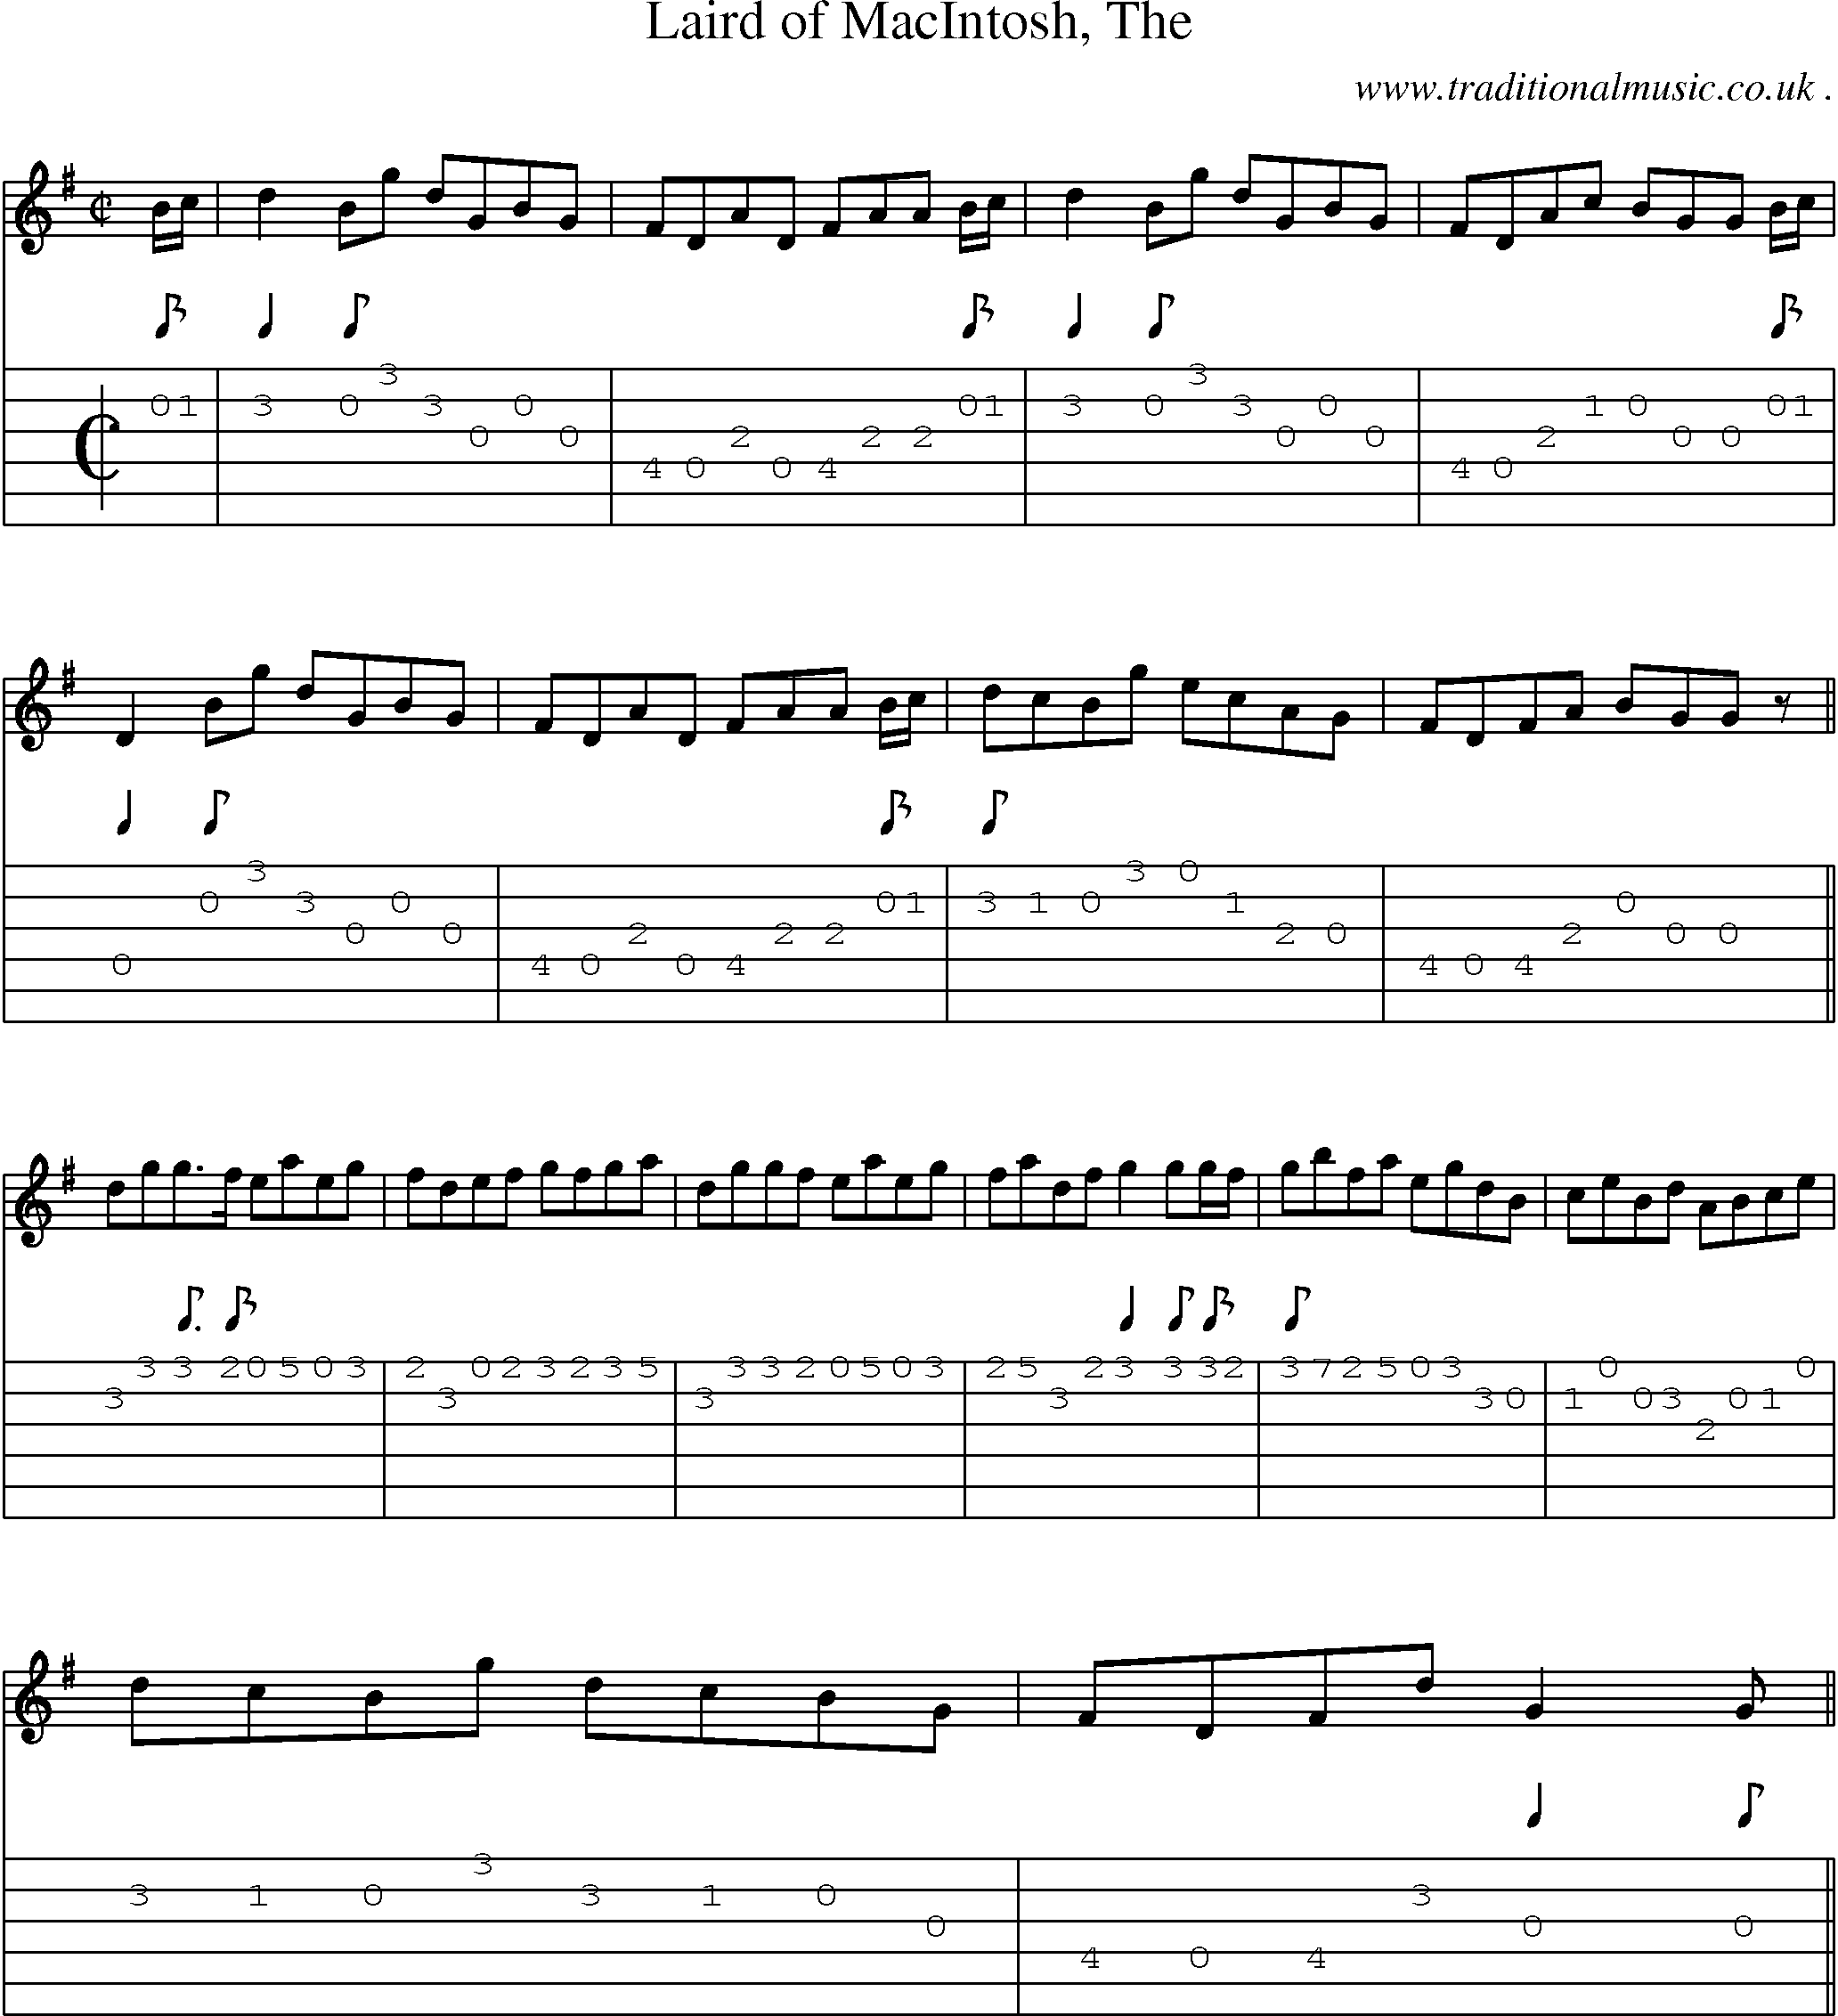 Sheet-music  score, Chords and Guitar Tabs for Laird Of Macintosh The